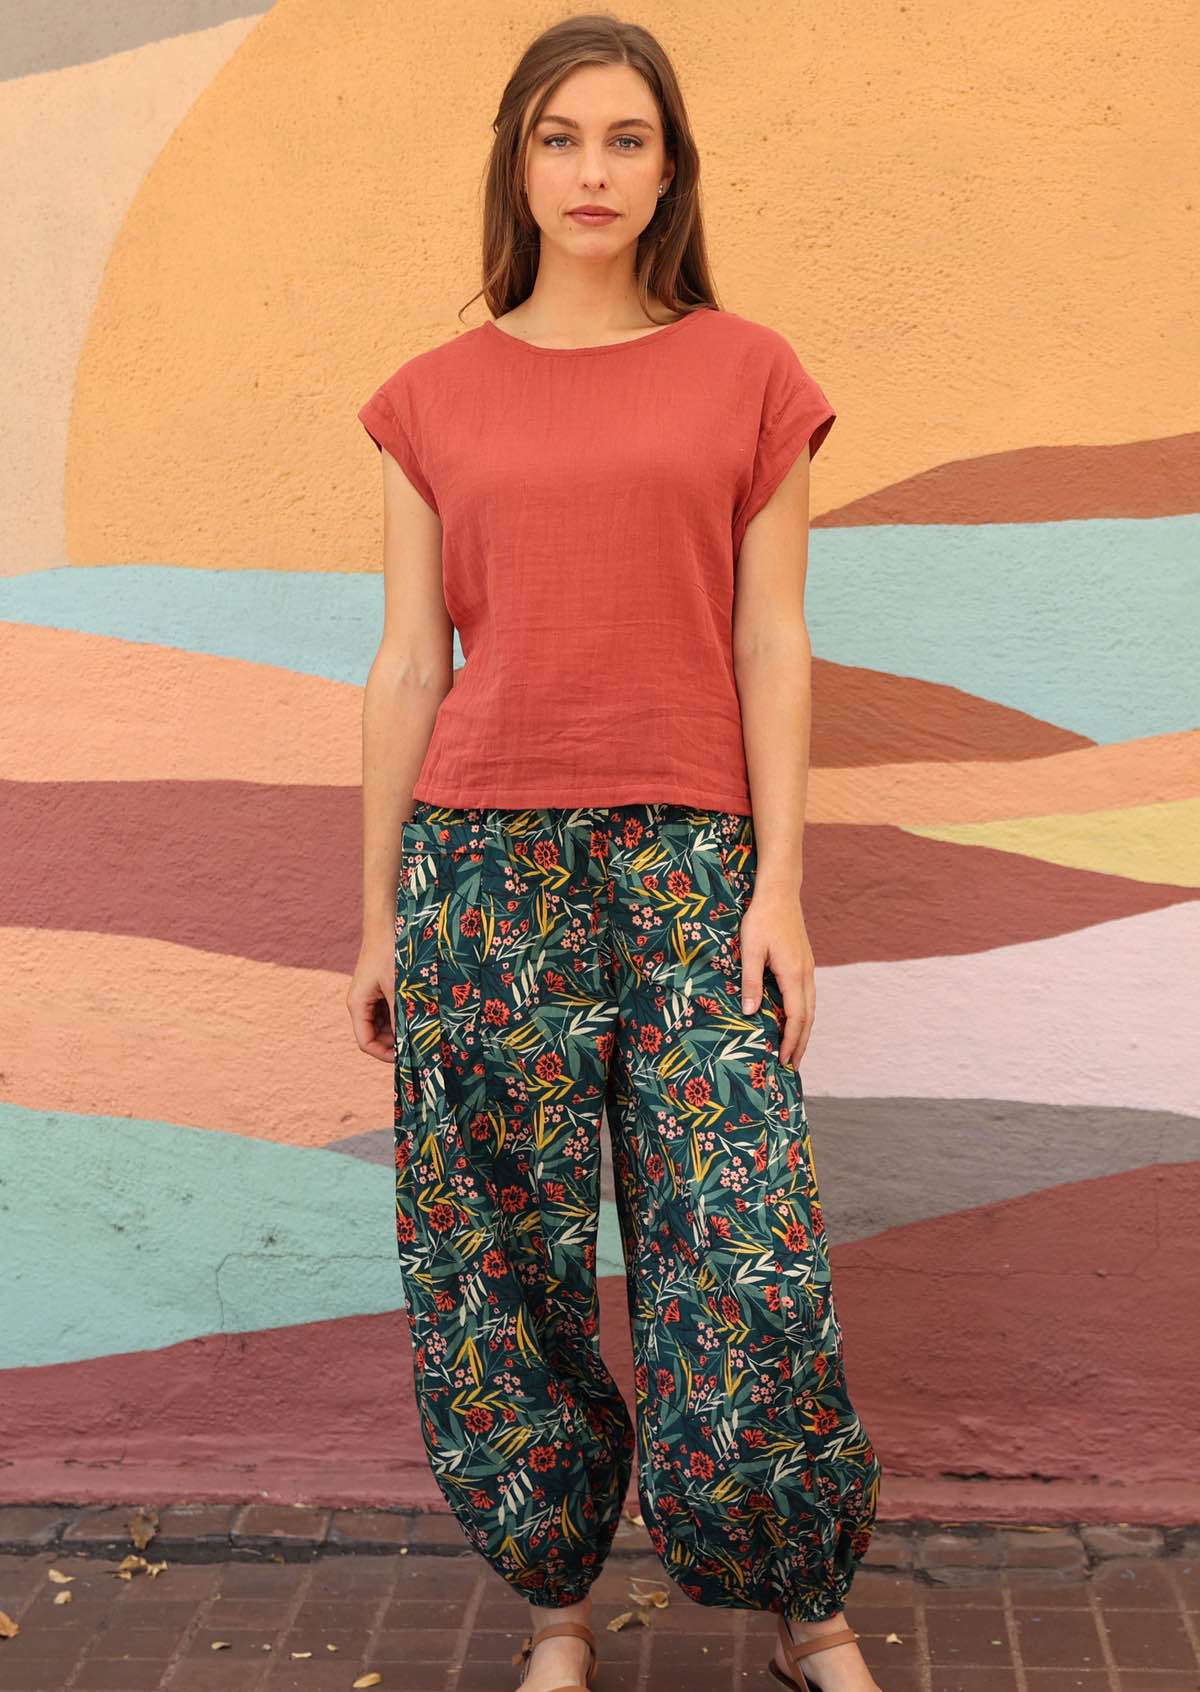 Woman wearing green cotton floral harem pants with pink top standing in front of sun mural